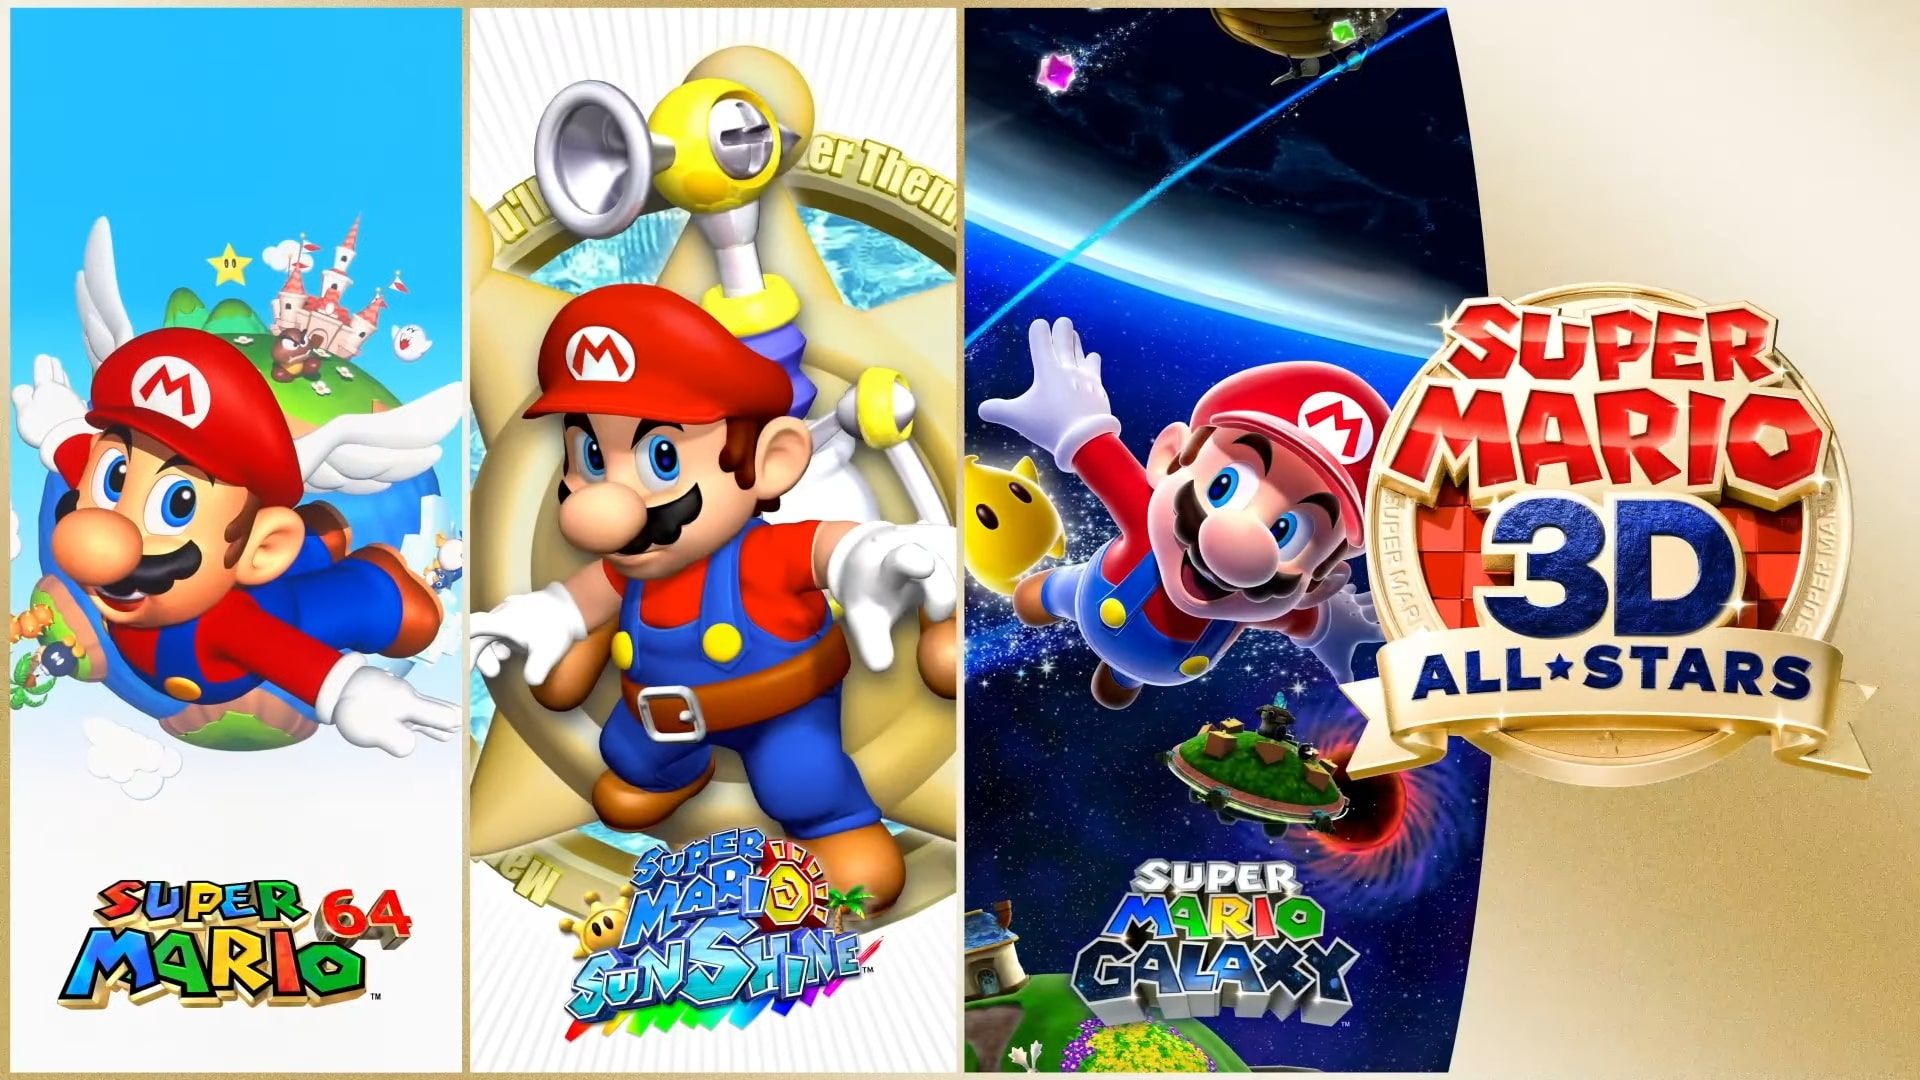 Super Mario 3D All Stars rolls three of the best Mario games into one package